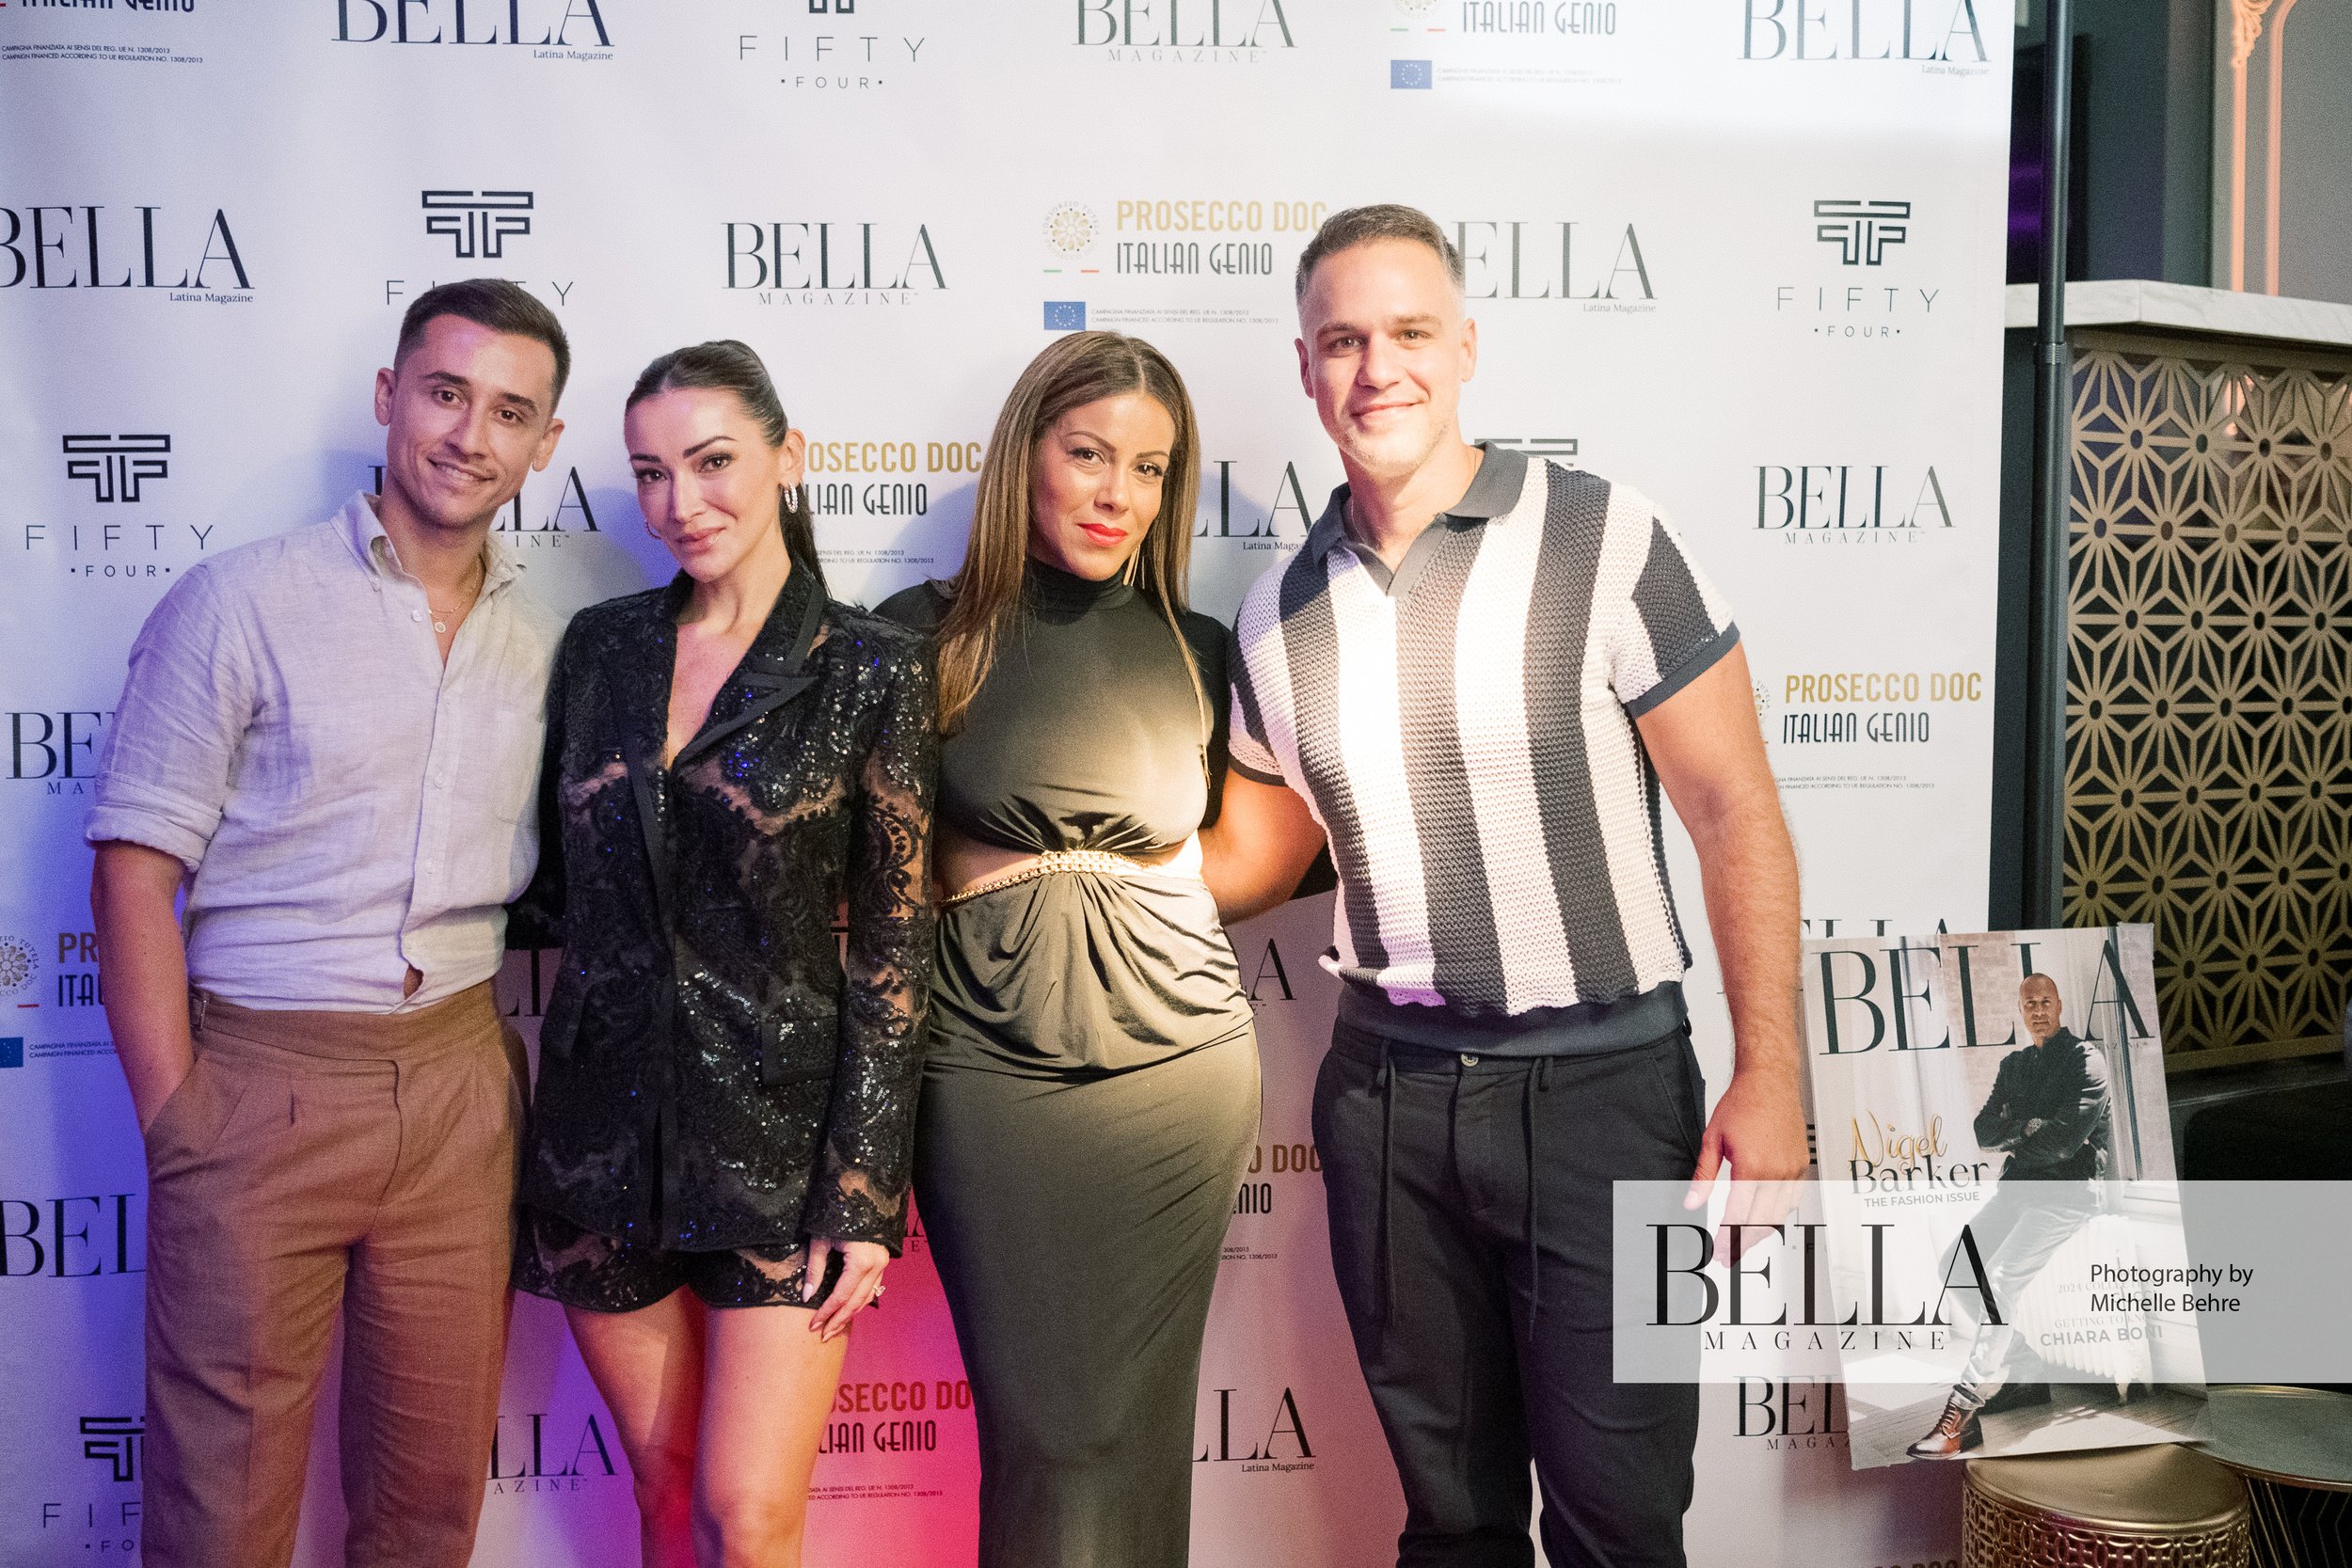 BELLA-Magazine-September-Issue-Cover-Event-Fifty-Four-204 2.jpg